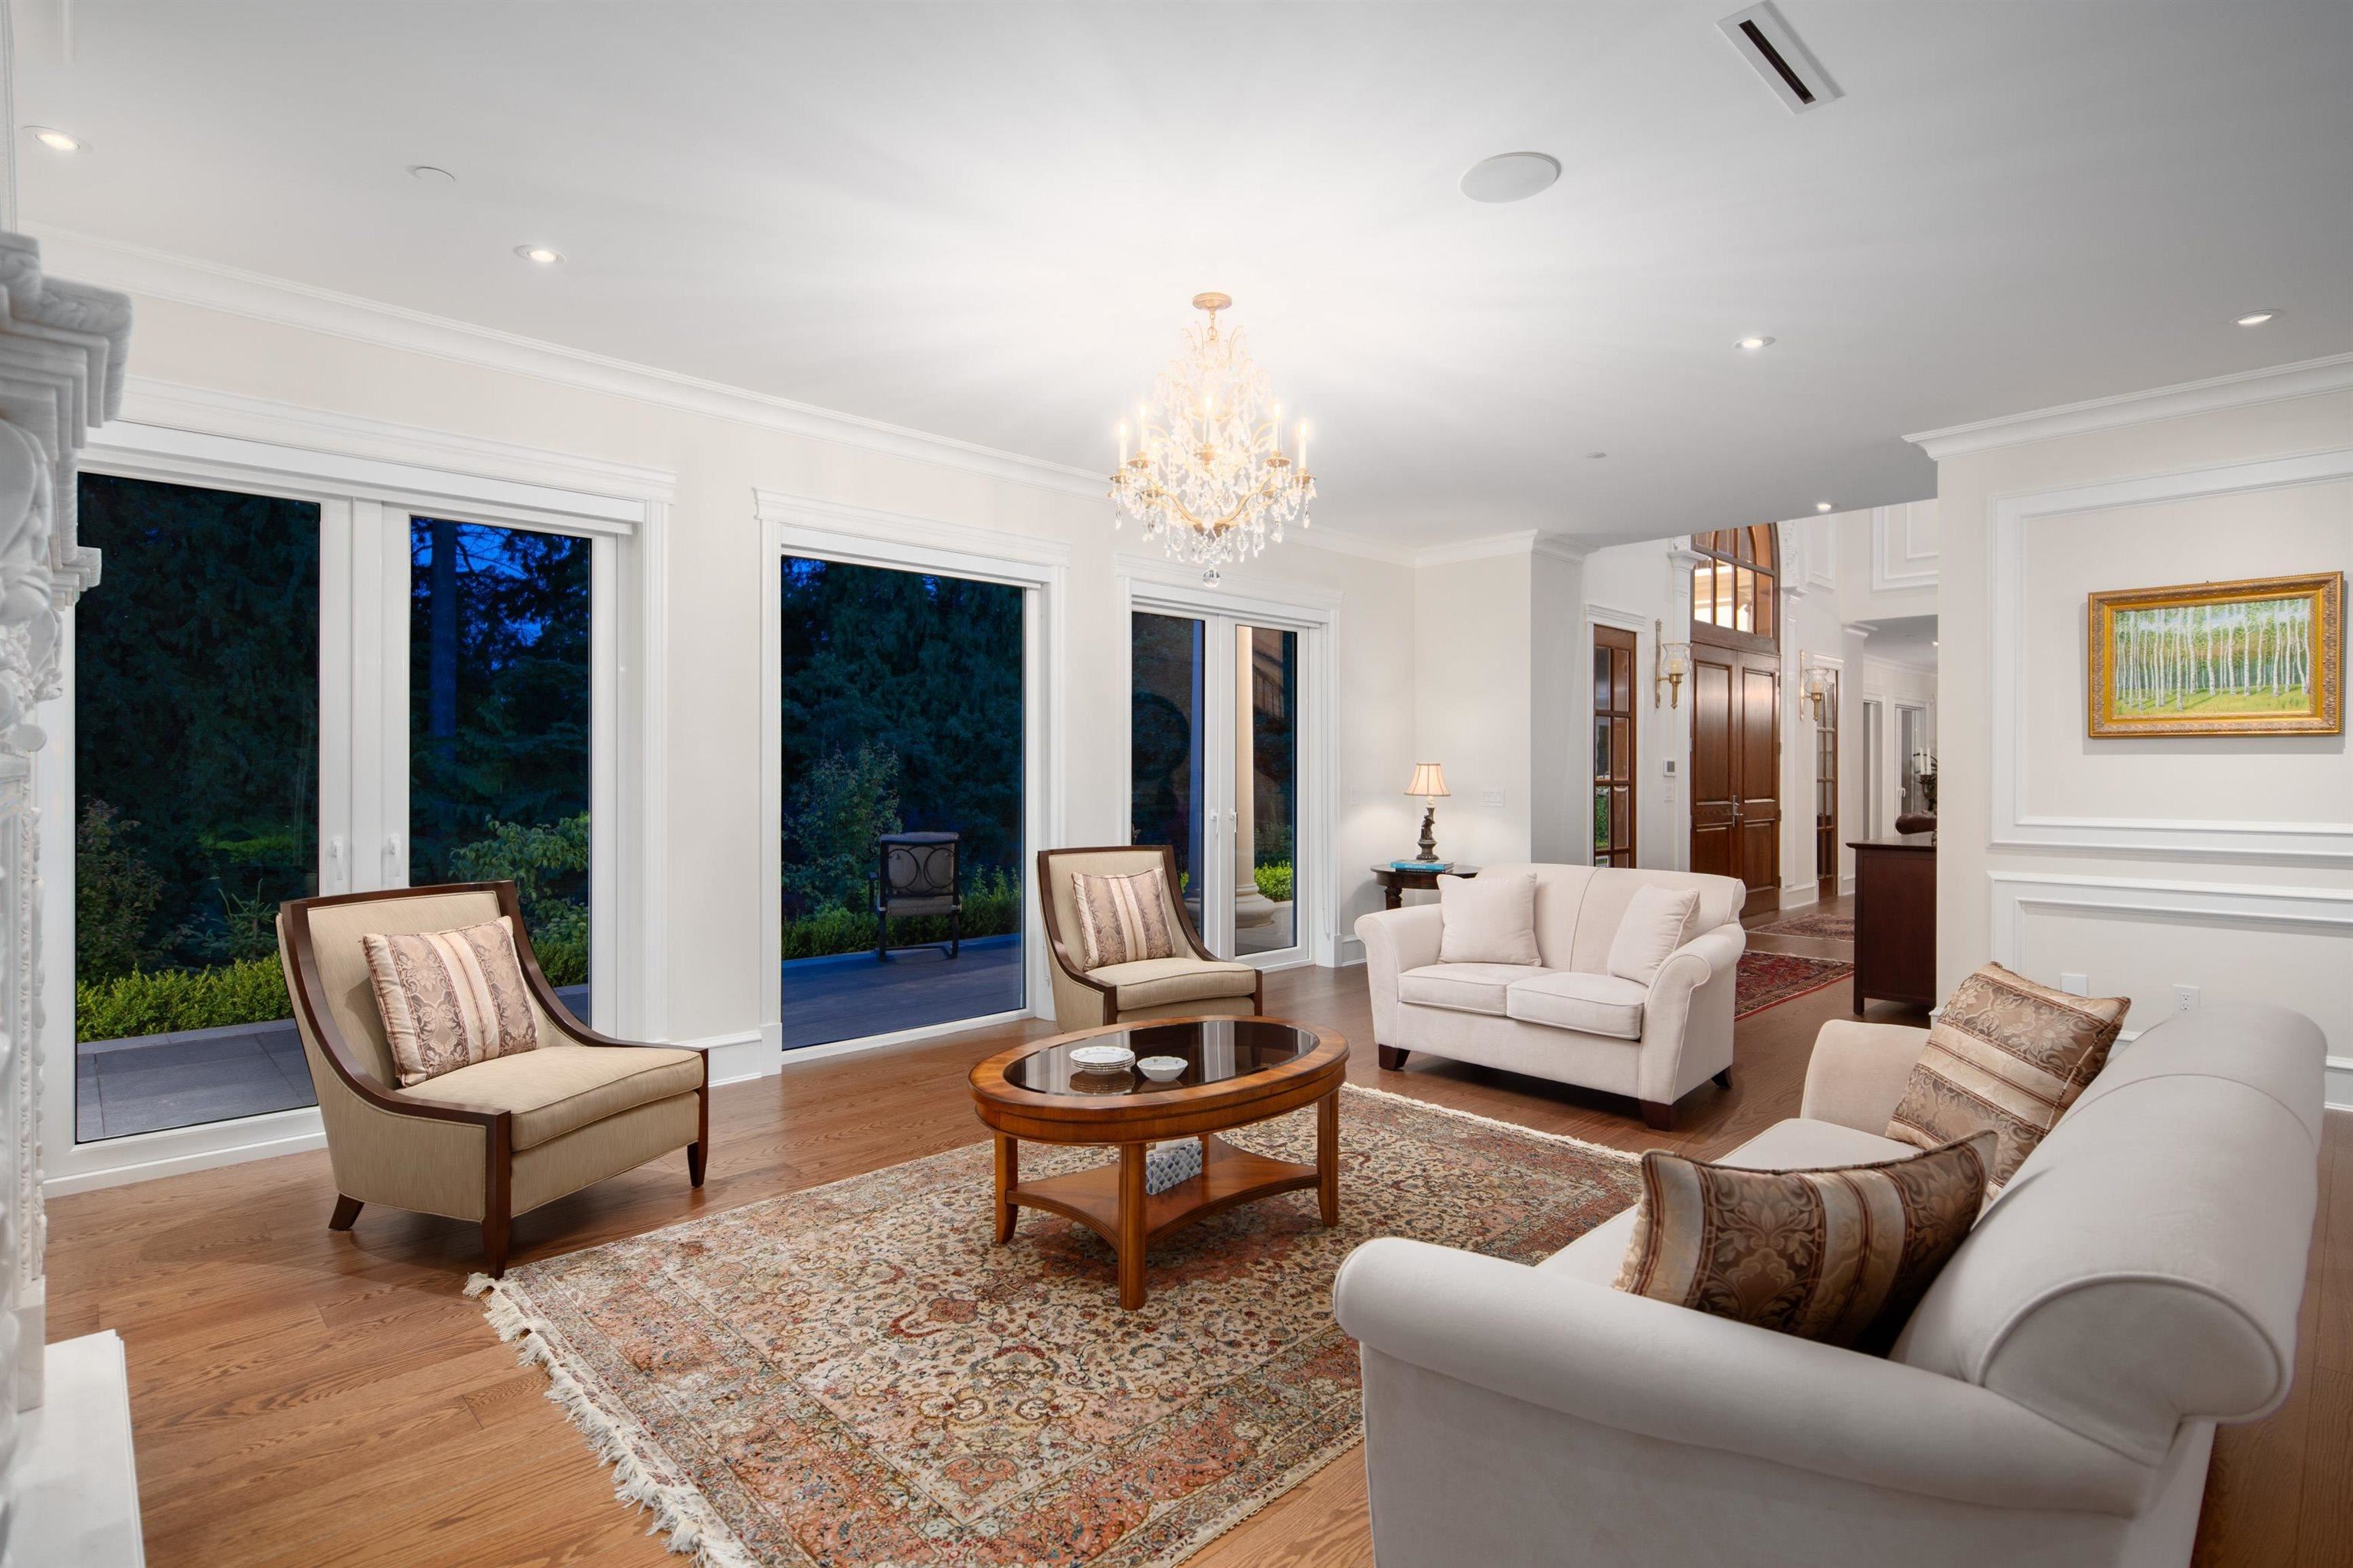 Listing image of 405 SOUTHBOROUGH DRIVE